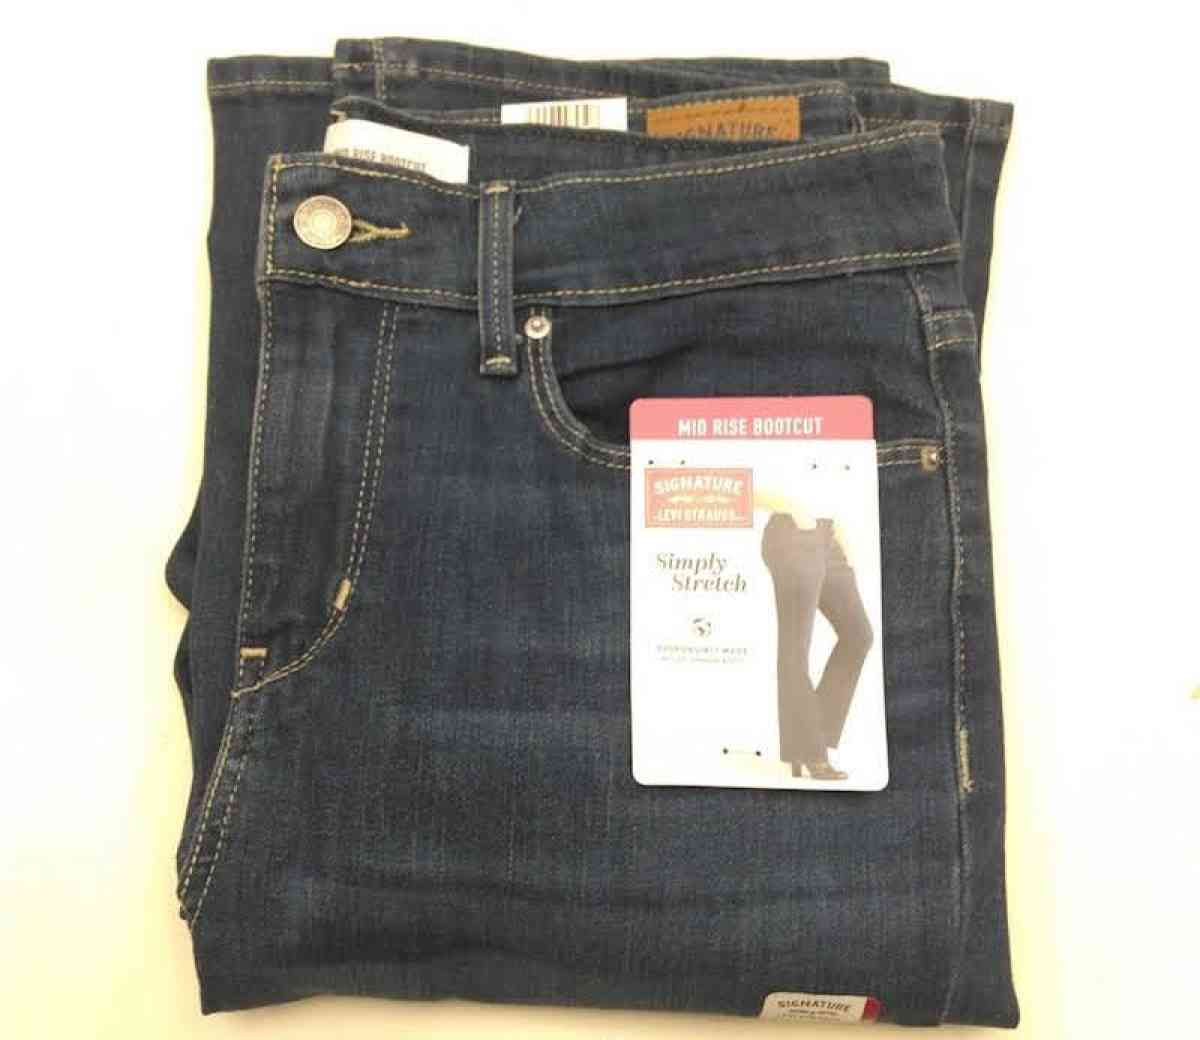 Levis Size 29 x 32 Mid Rise Bootcut Jeans NWT